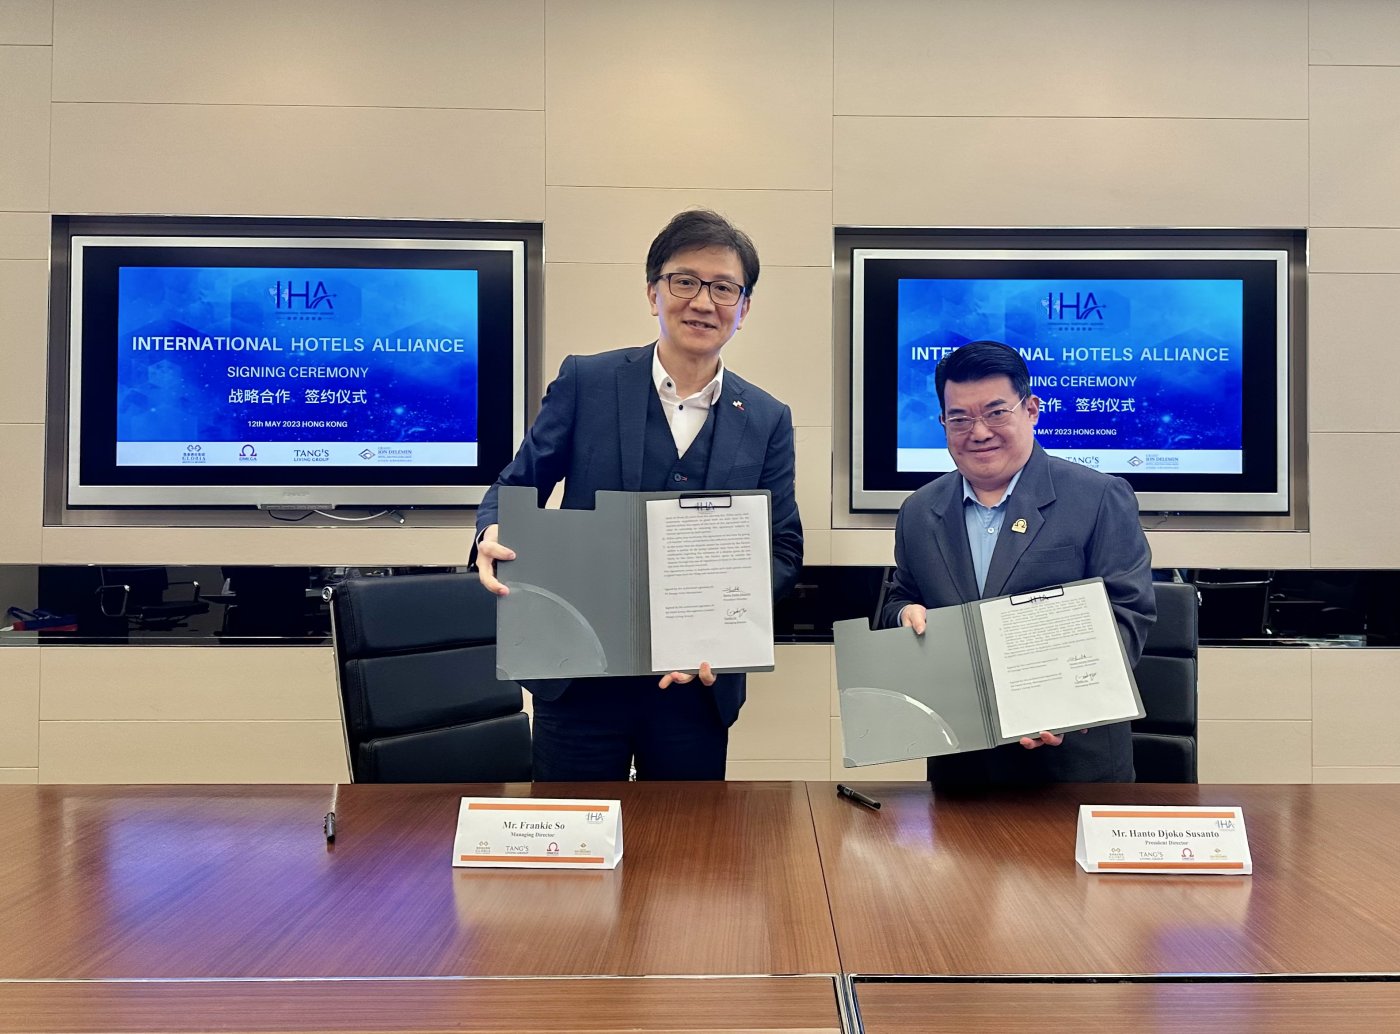 Omega Hotel Management, an Indonesian hotel management company, signed an International Hotels Alliance agreement with Gloria Hotels & Resort China, Tang’s Living Group Hong Kong and Ion Delemen Hospitality Malaysia in Hong Kong